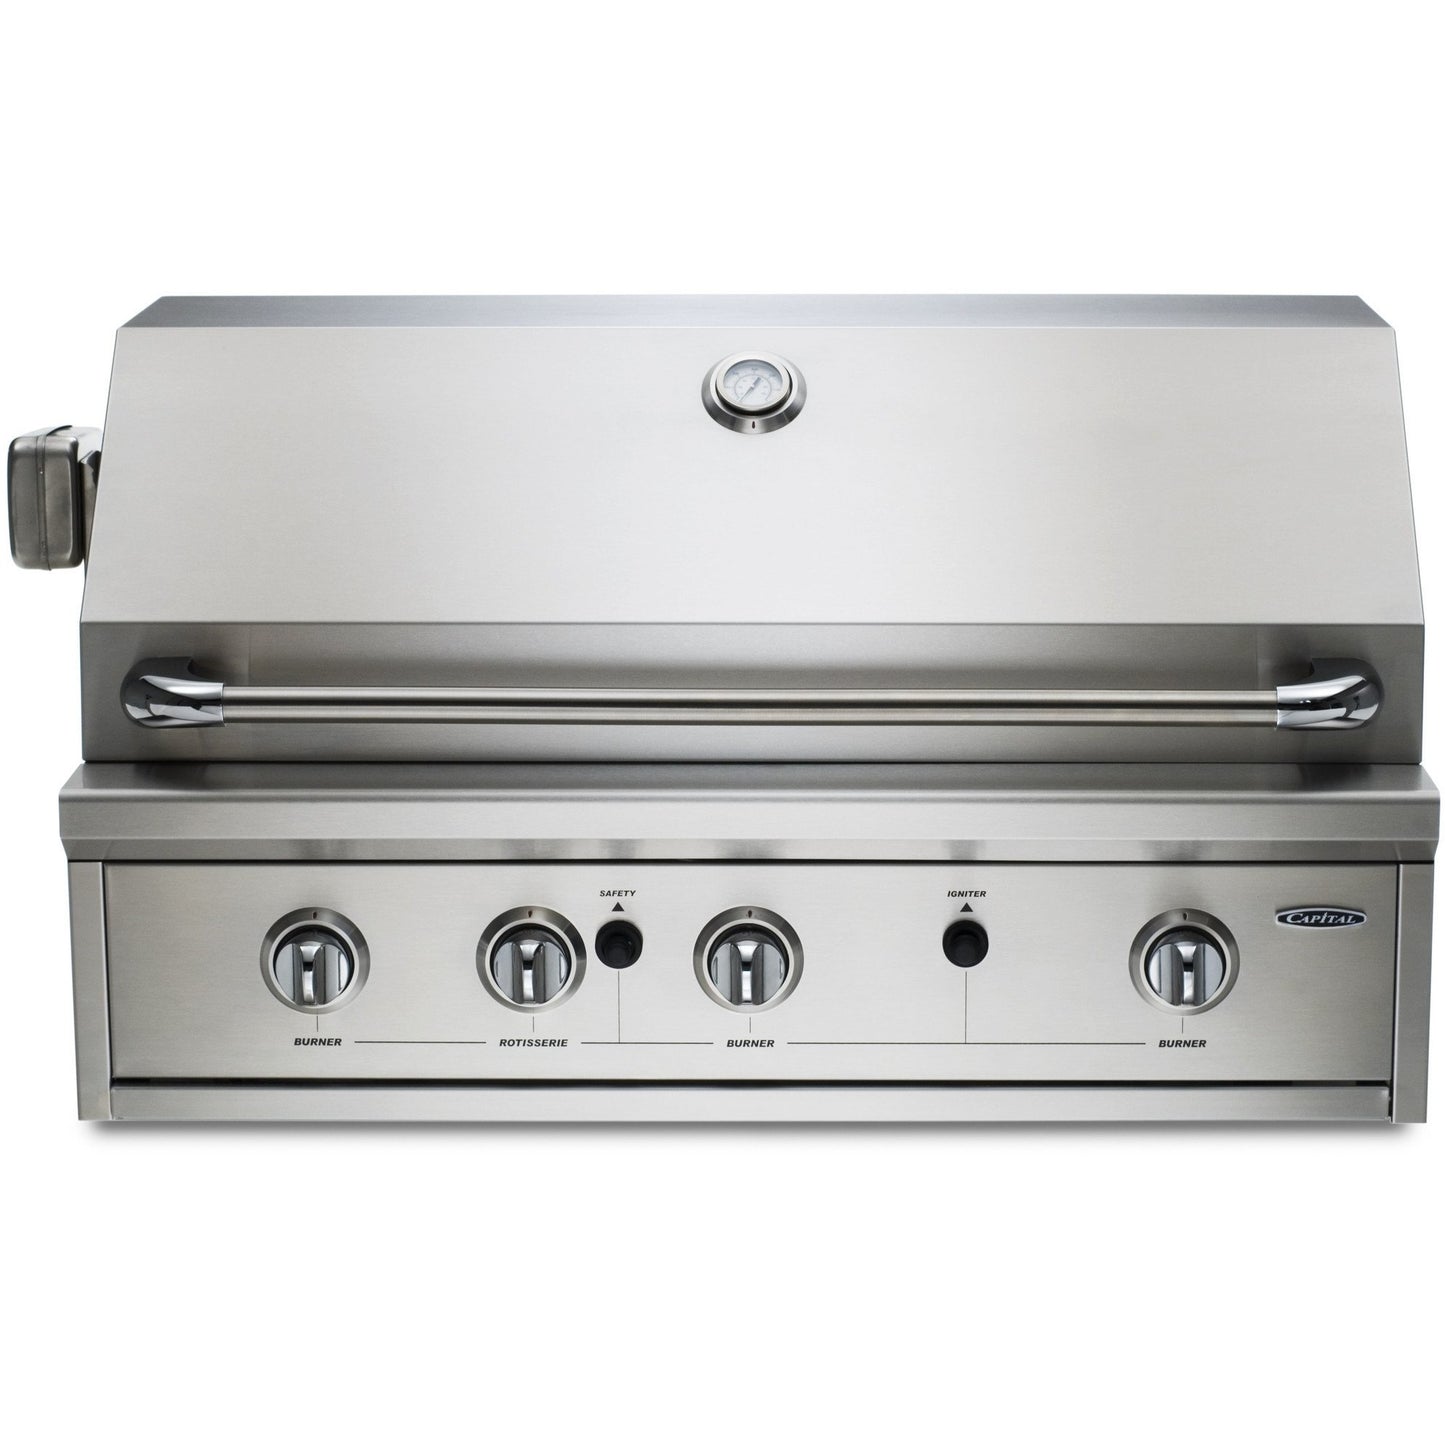 Capital Professional Series 36-Inch PRO36RBI Built-In Grill - M&K Grills